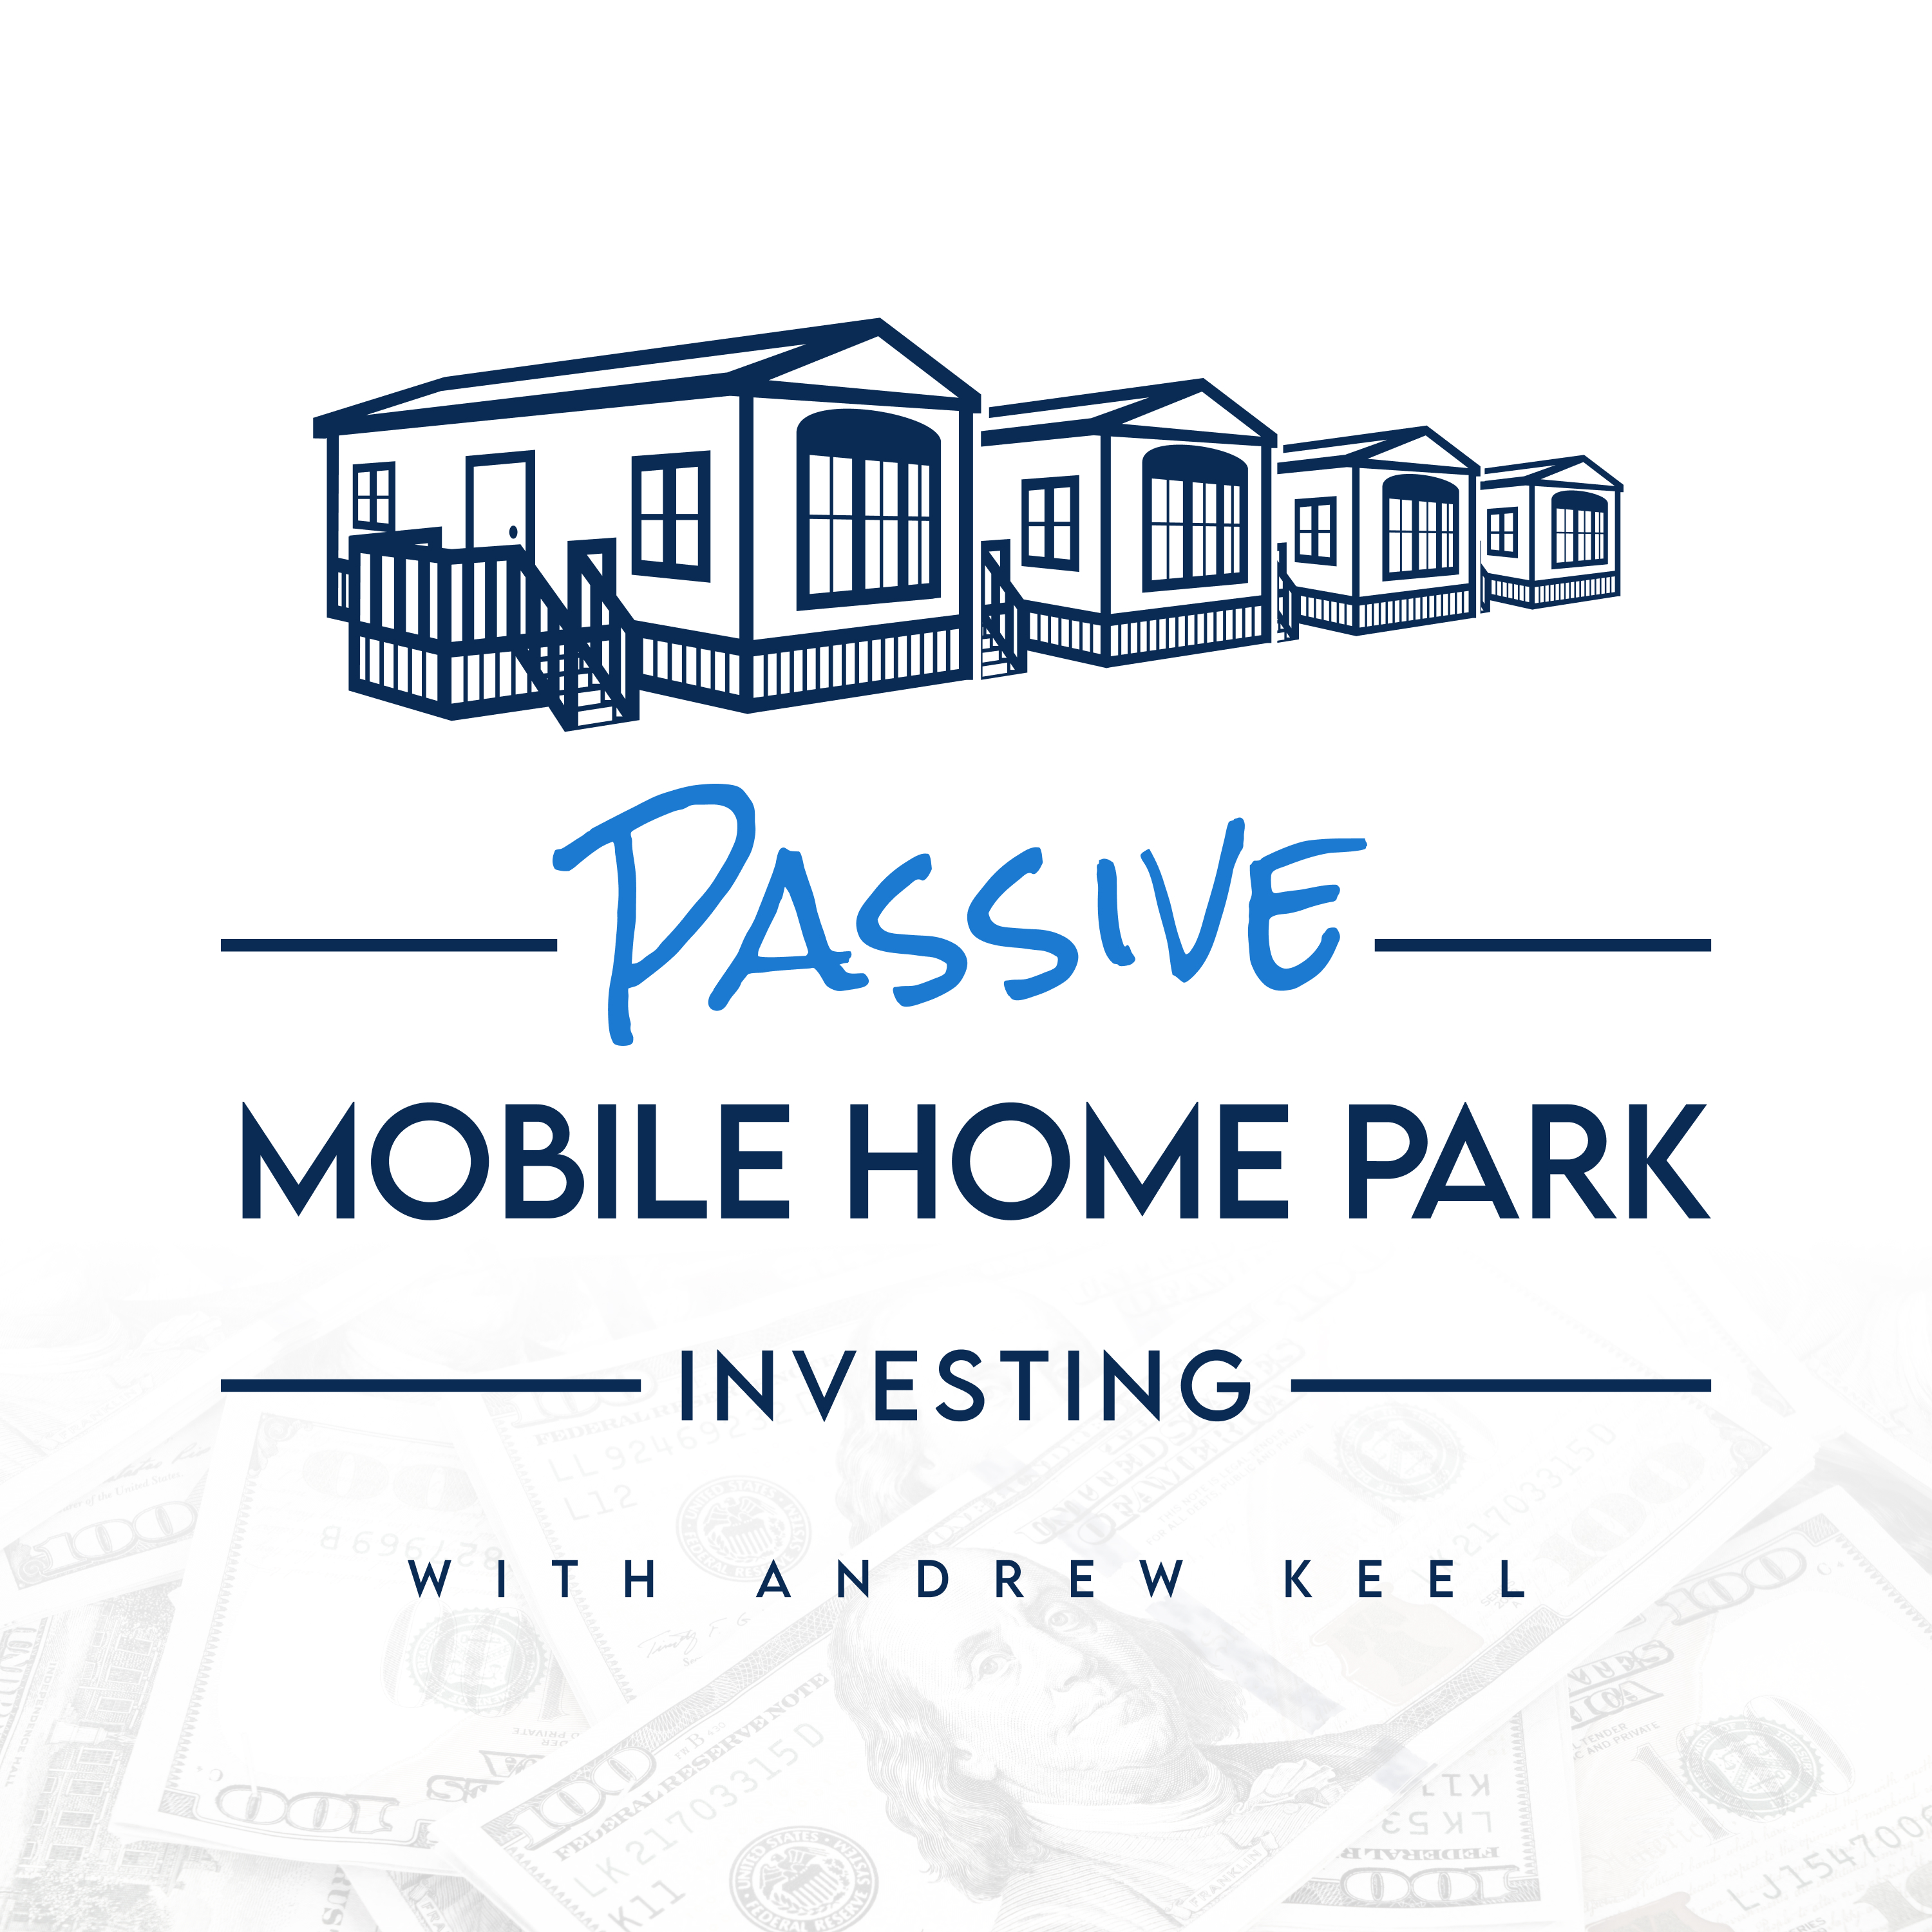 Mobile Home Parks Have a Low Loan Default Rate